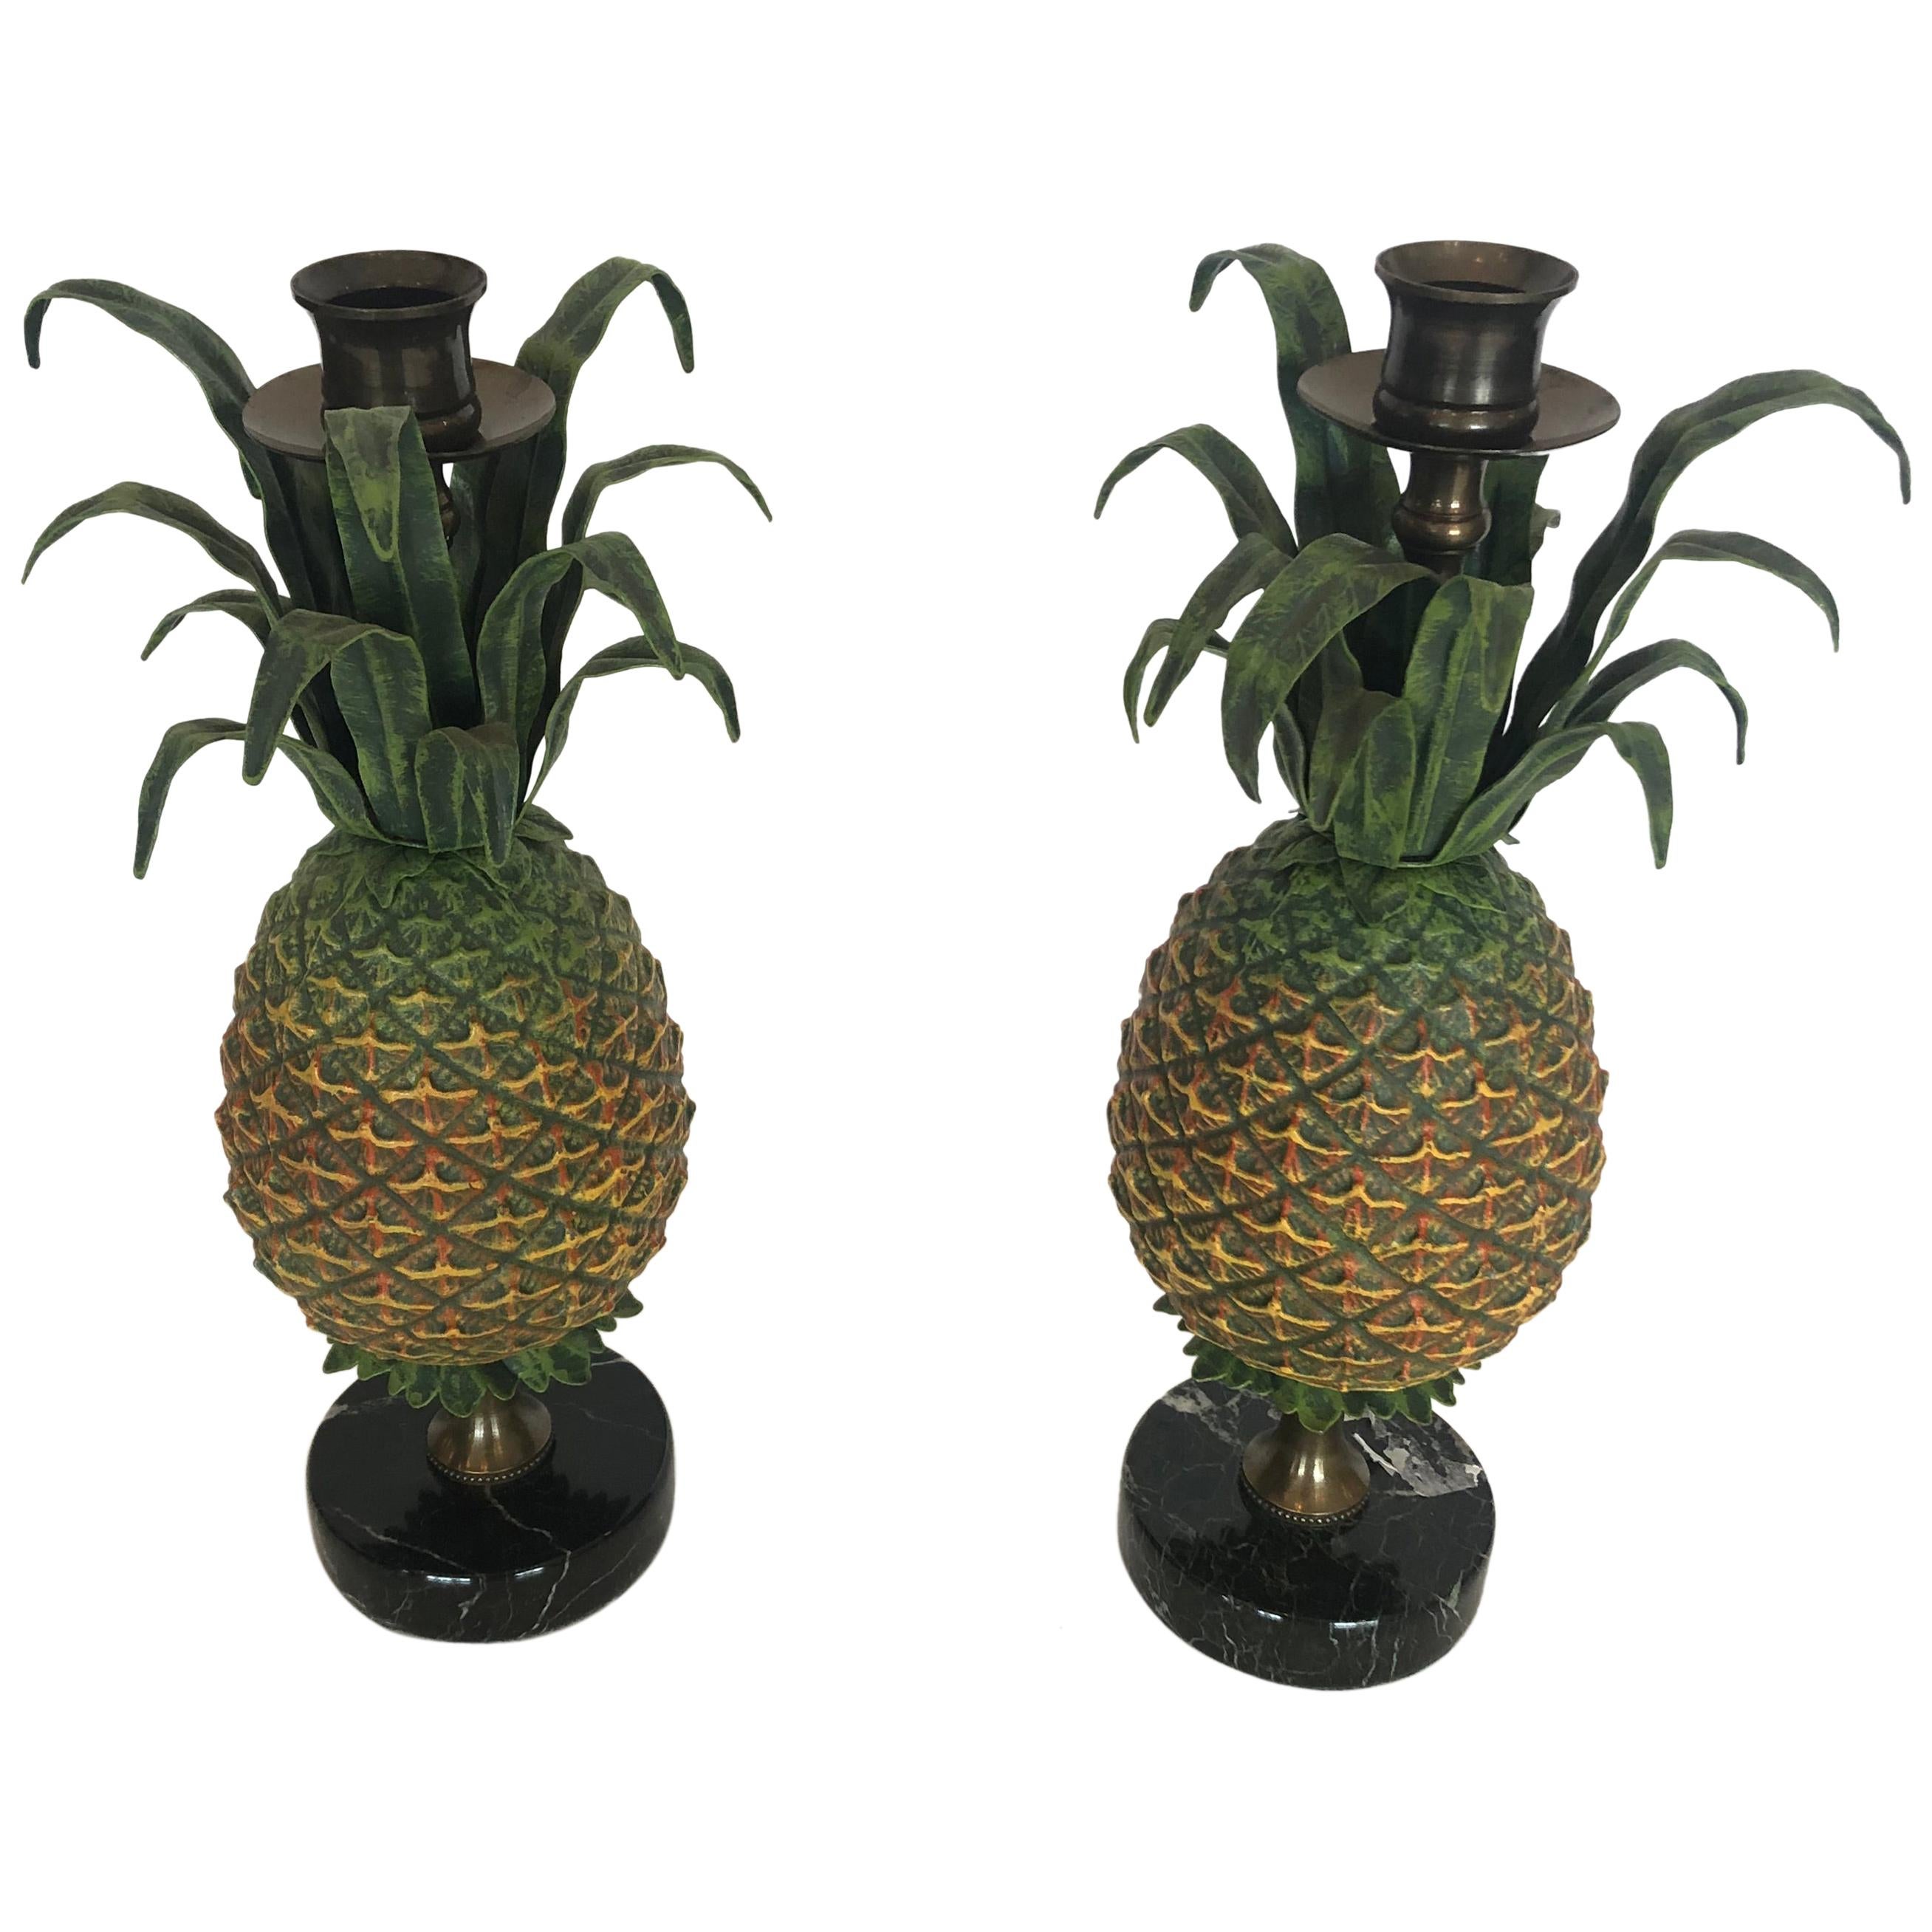 Delightful Pair of Tole and Brass Pineapple Candlesticks For Sale